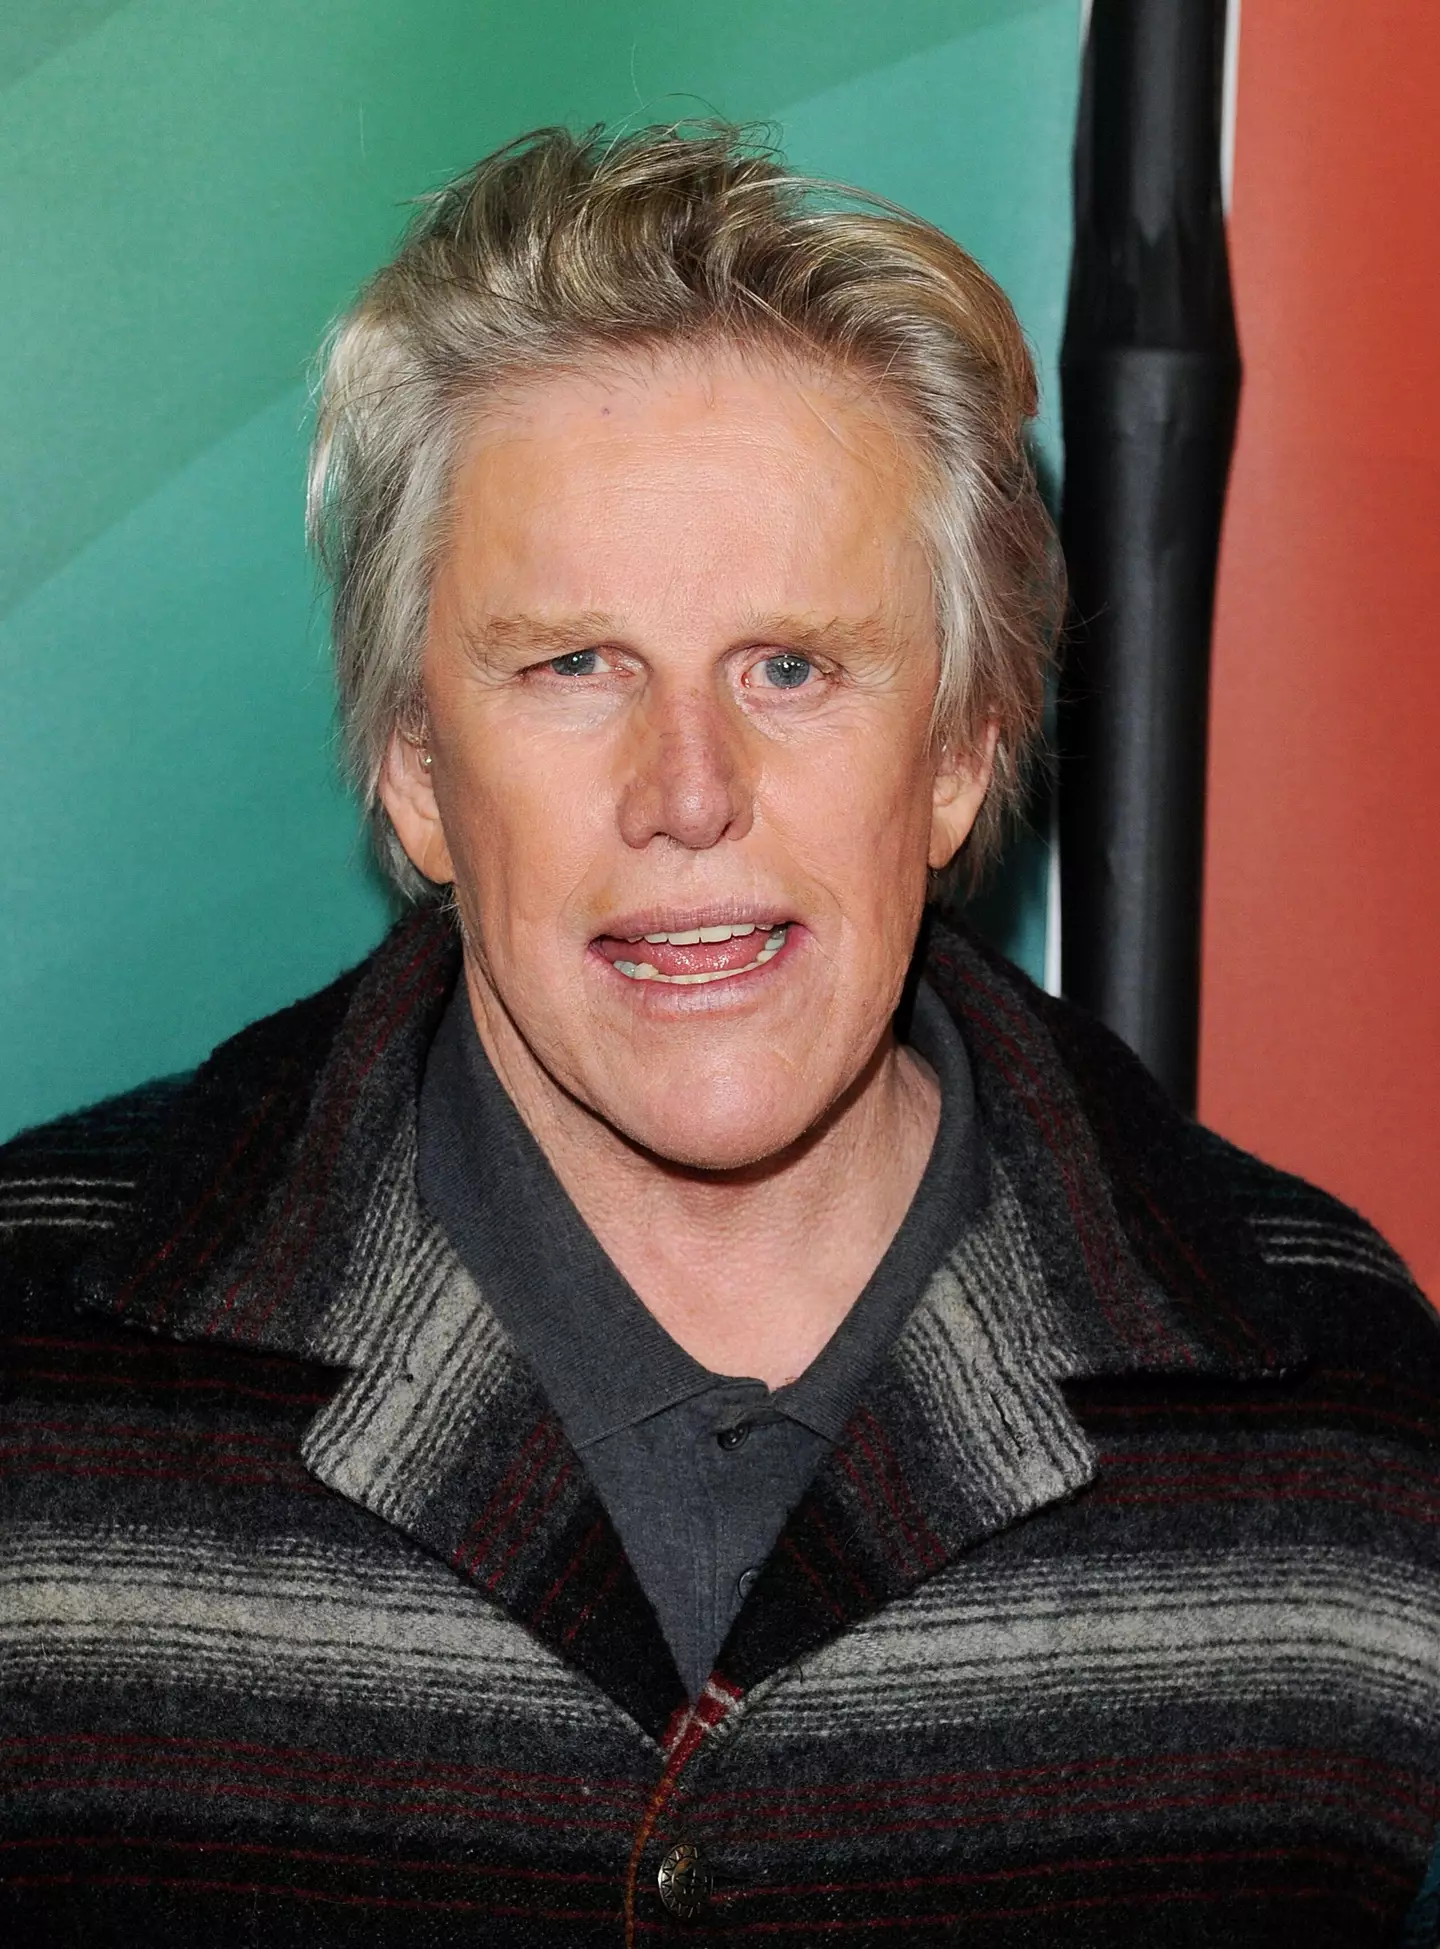 Police confirmed Busey had been charged over alleged incidents at a horror movie convention.